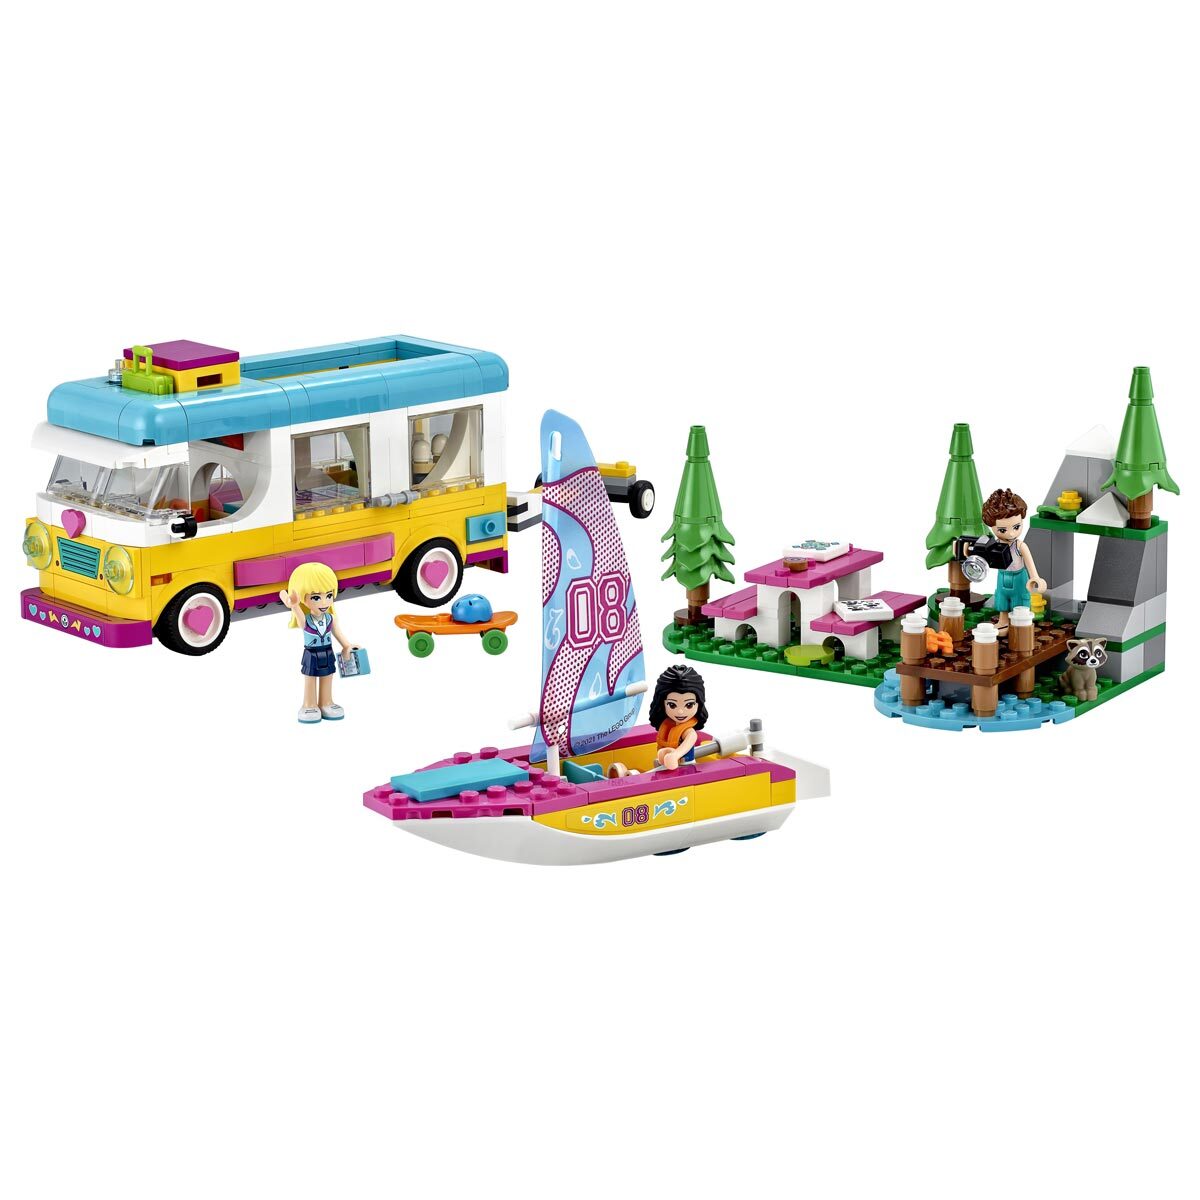 Buy LEGO Friends Forest Camper Van & Sailboat Overview Image at costco.co.uk